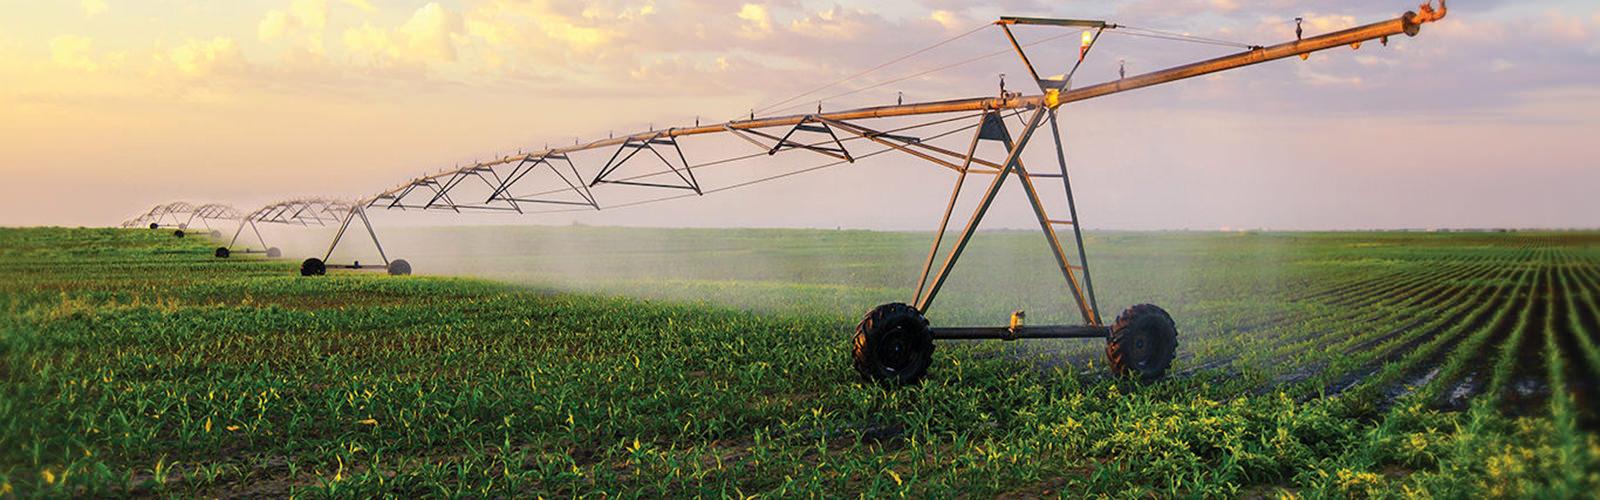 irrigation system for crops